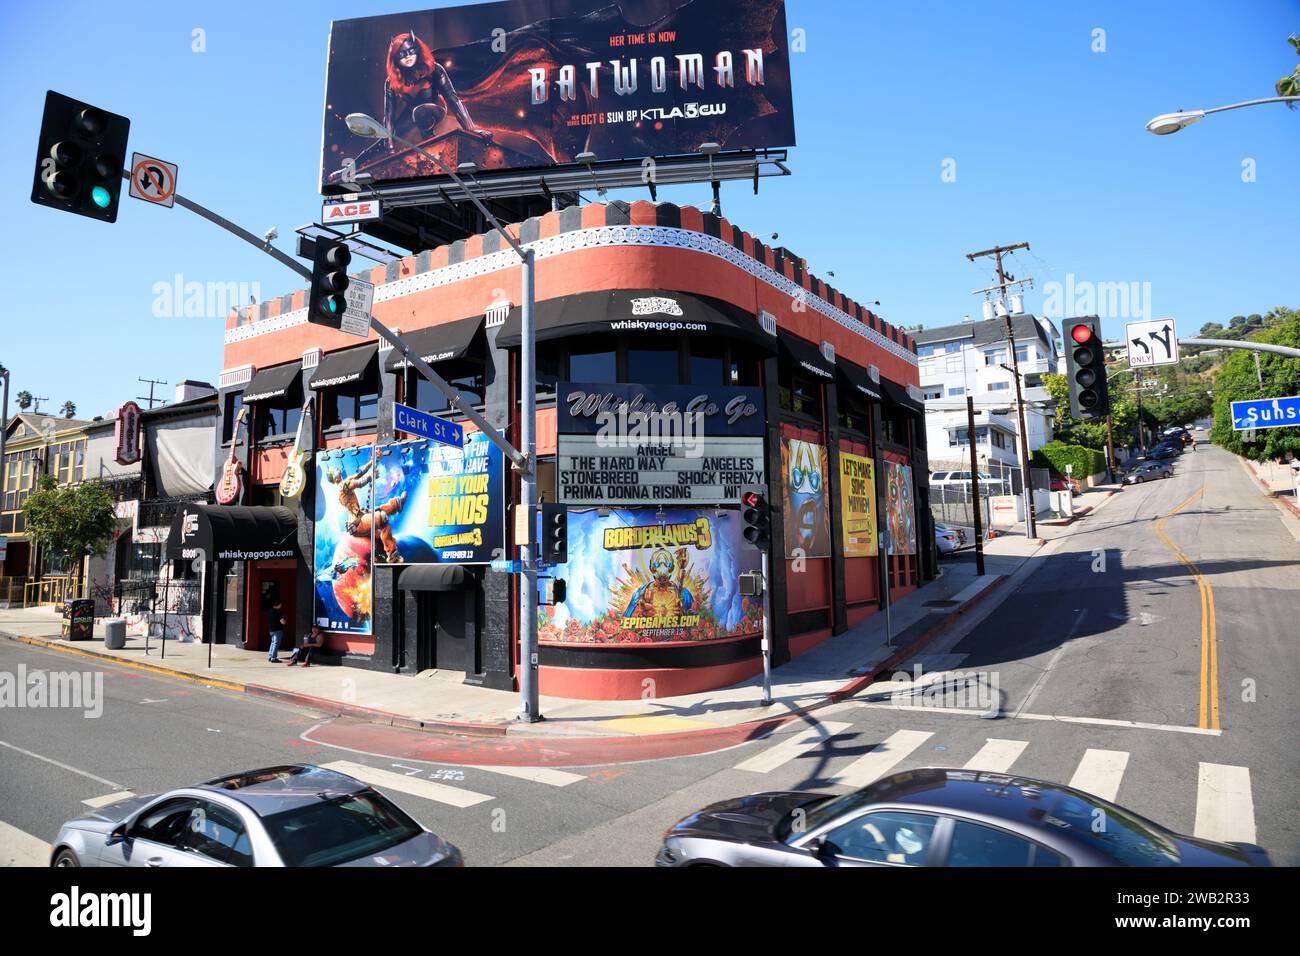 The famous Whisky a Go Go night club and live music venue, Sunset Blvd, West Hollywood, Los Angeles, California, USA. whiskyagogo Stock Photo